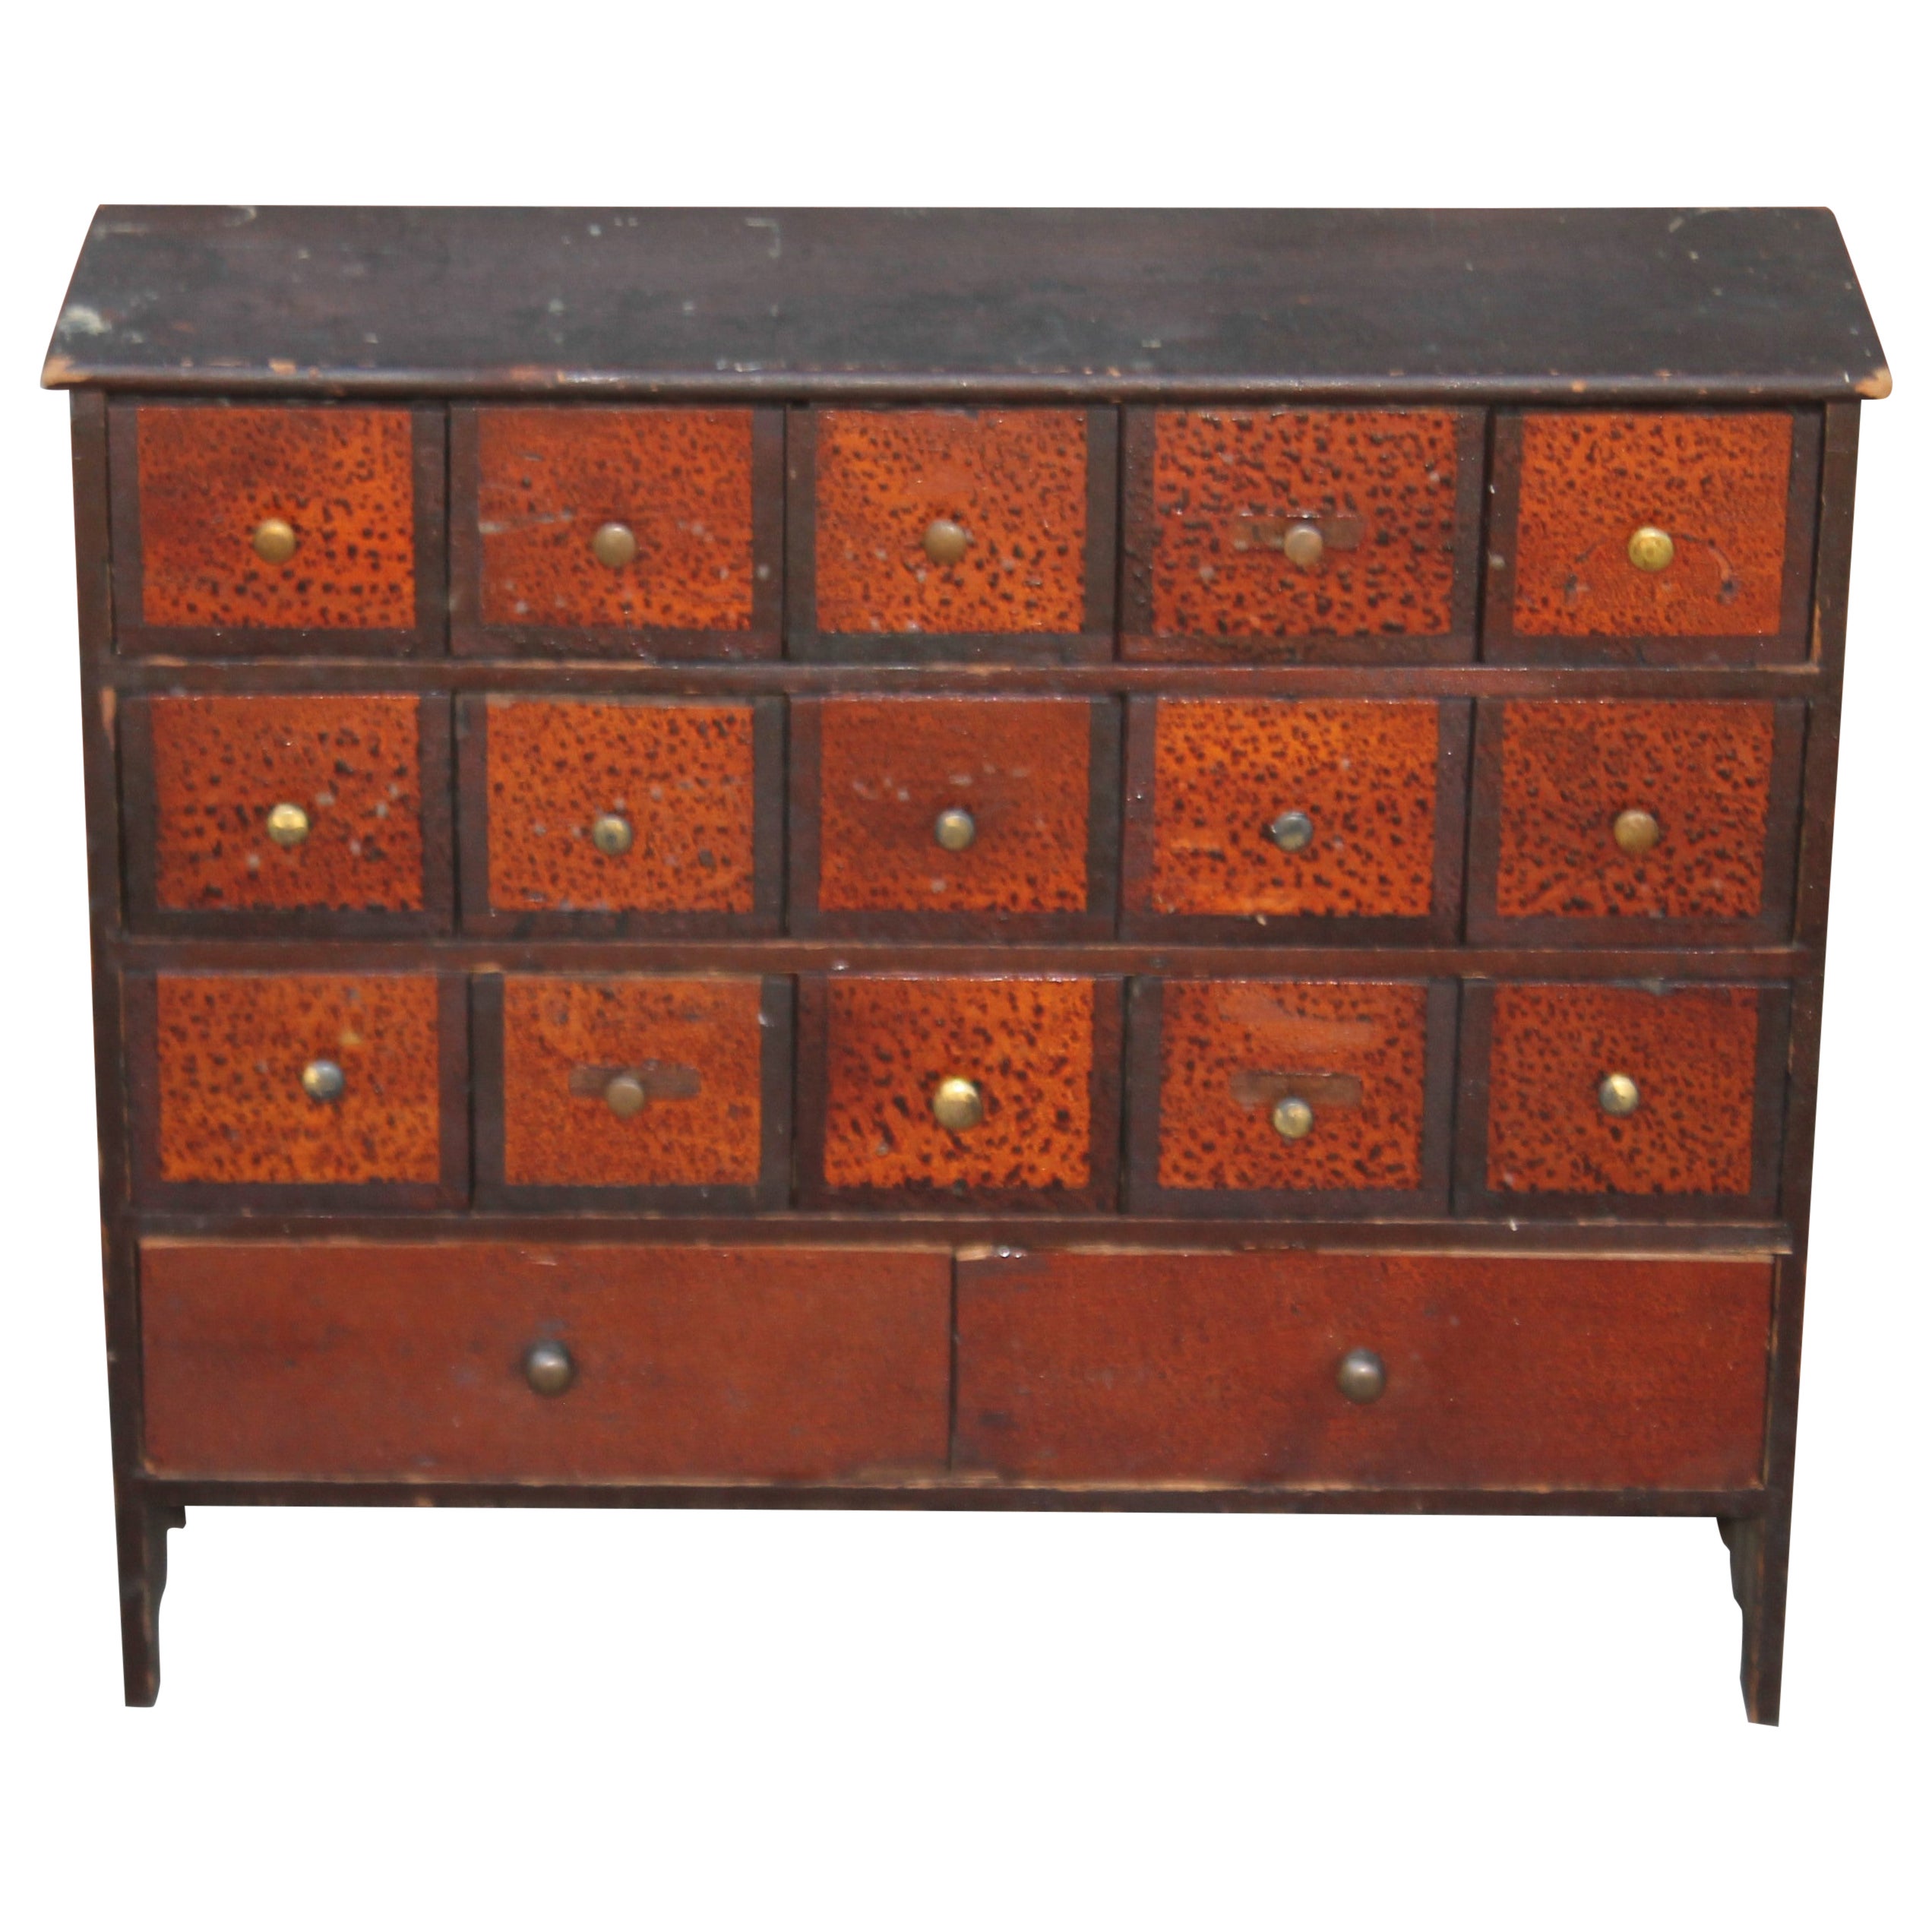 19thc Original Painted Apothecary Cabinet with 17 Drawers